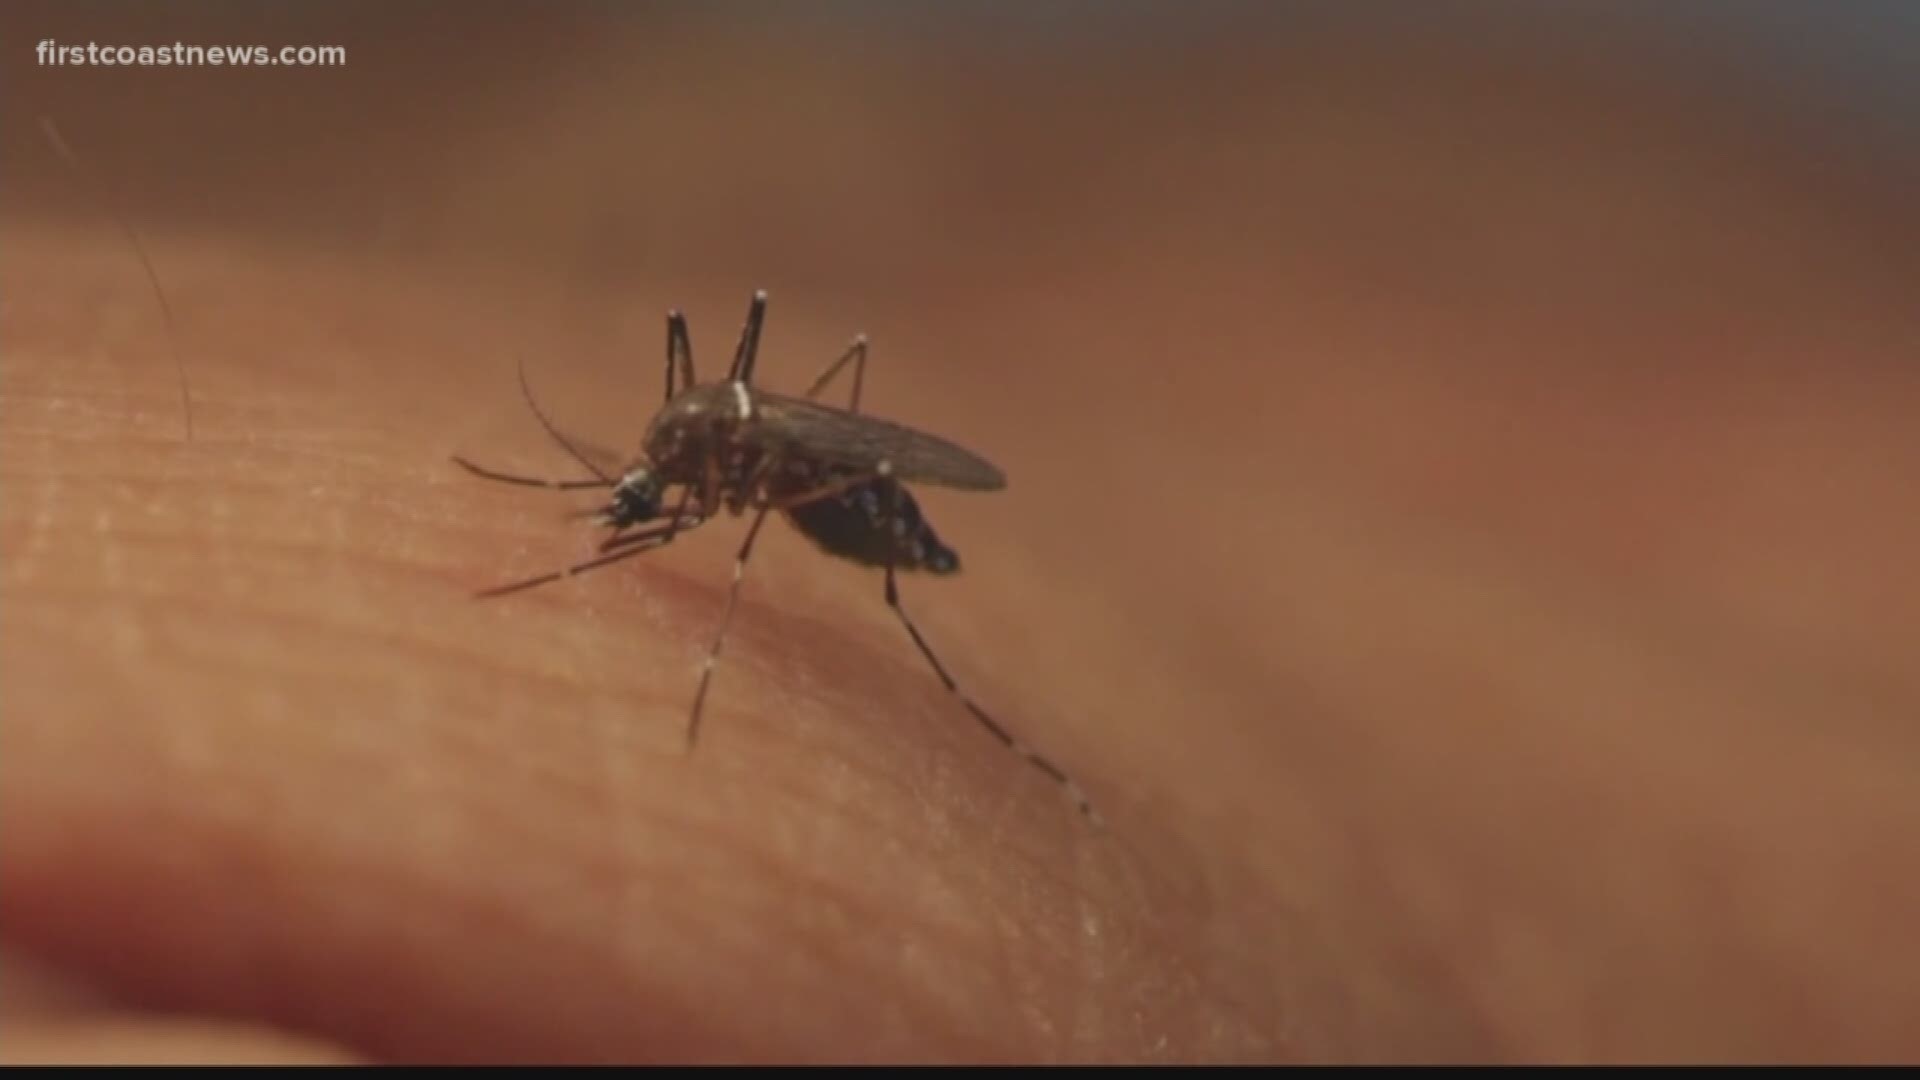 Virus-carrying mosquitoes have been detected in Clay and Glynn County, county officials confirm.